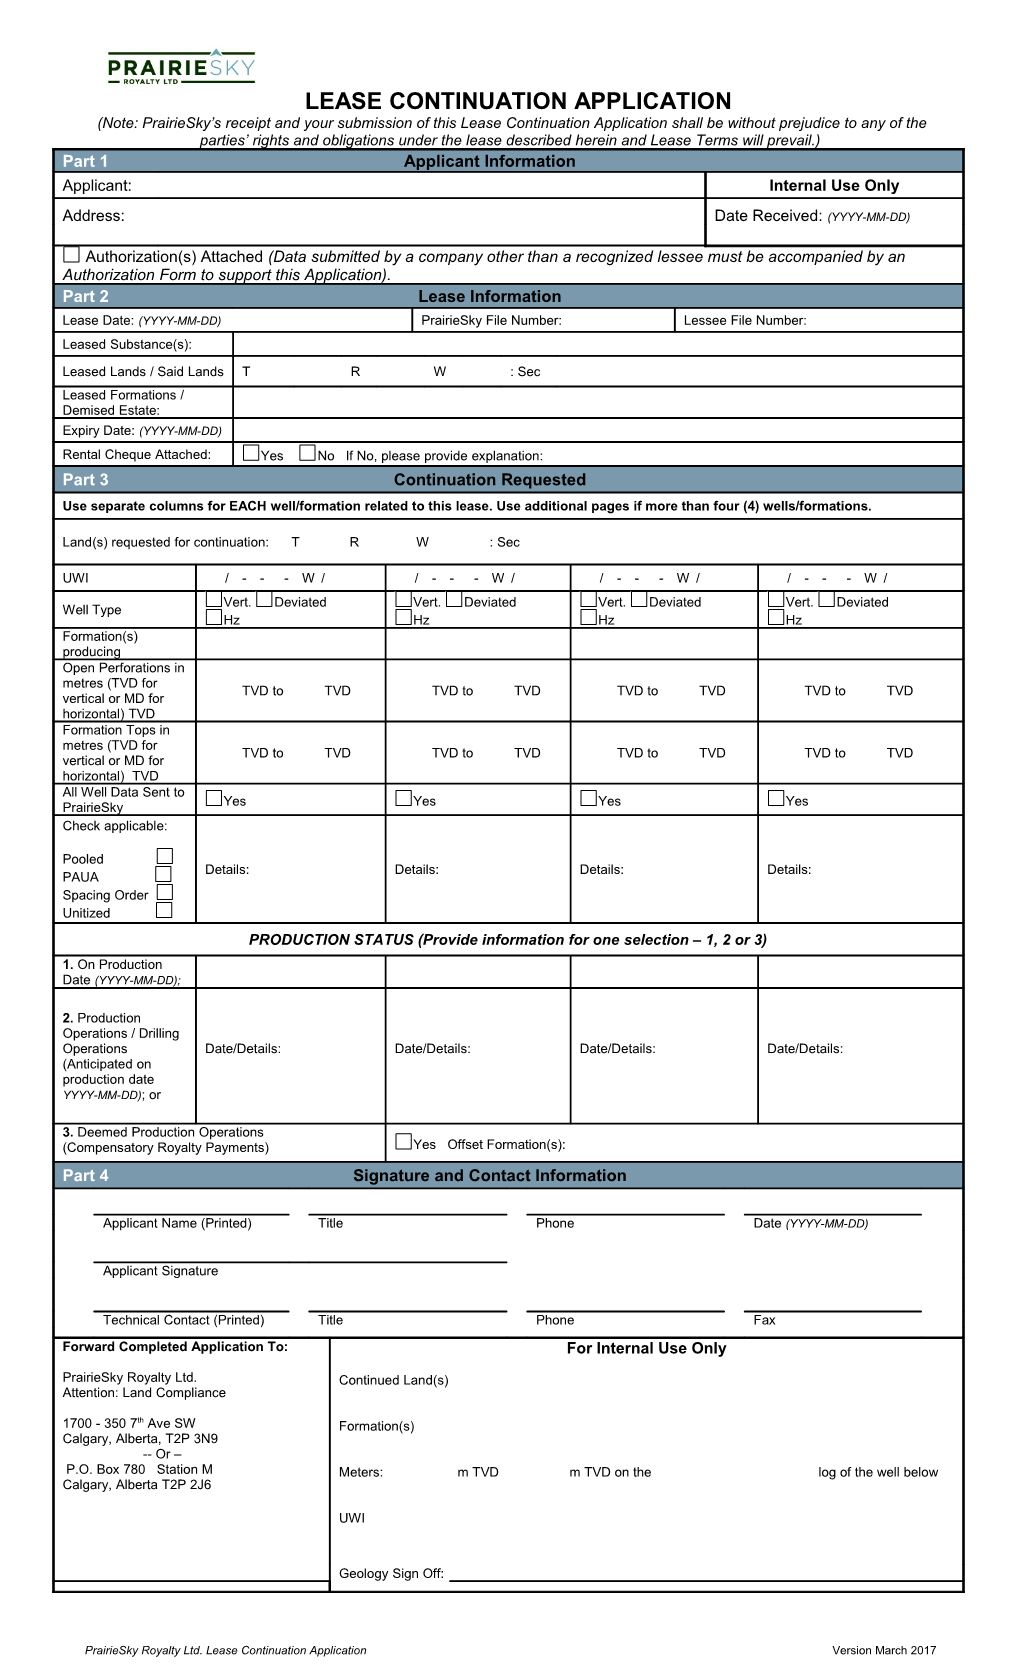 Lease Continuation Application s1